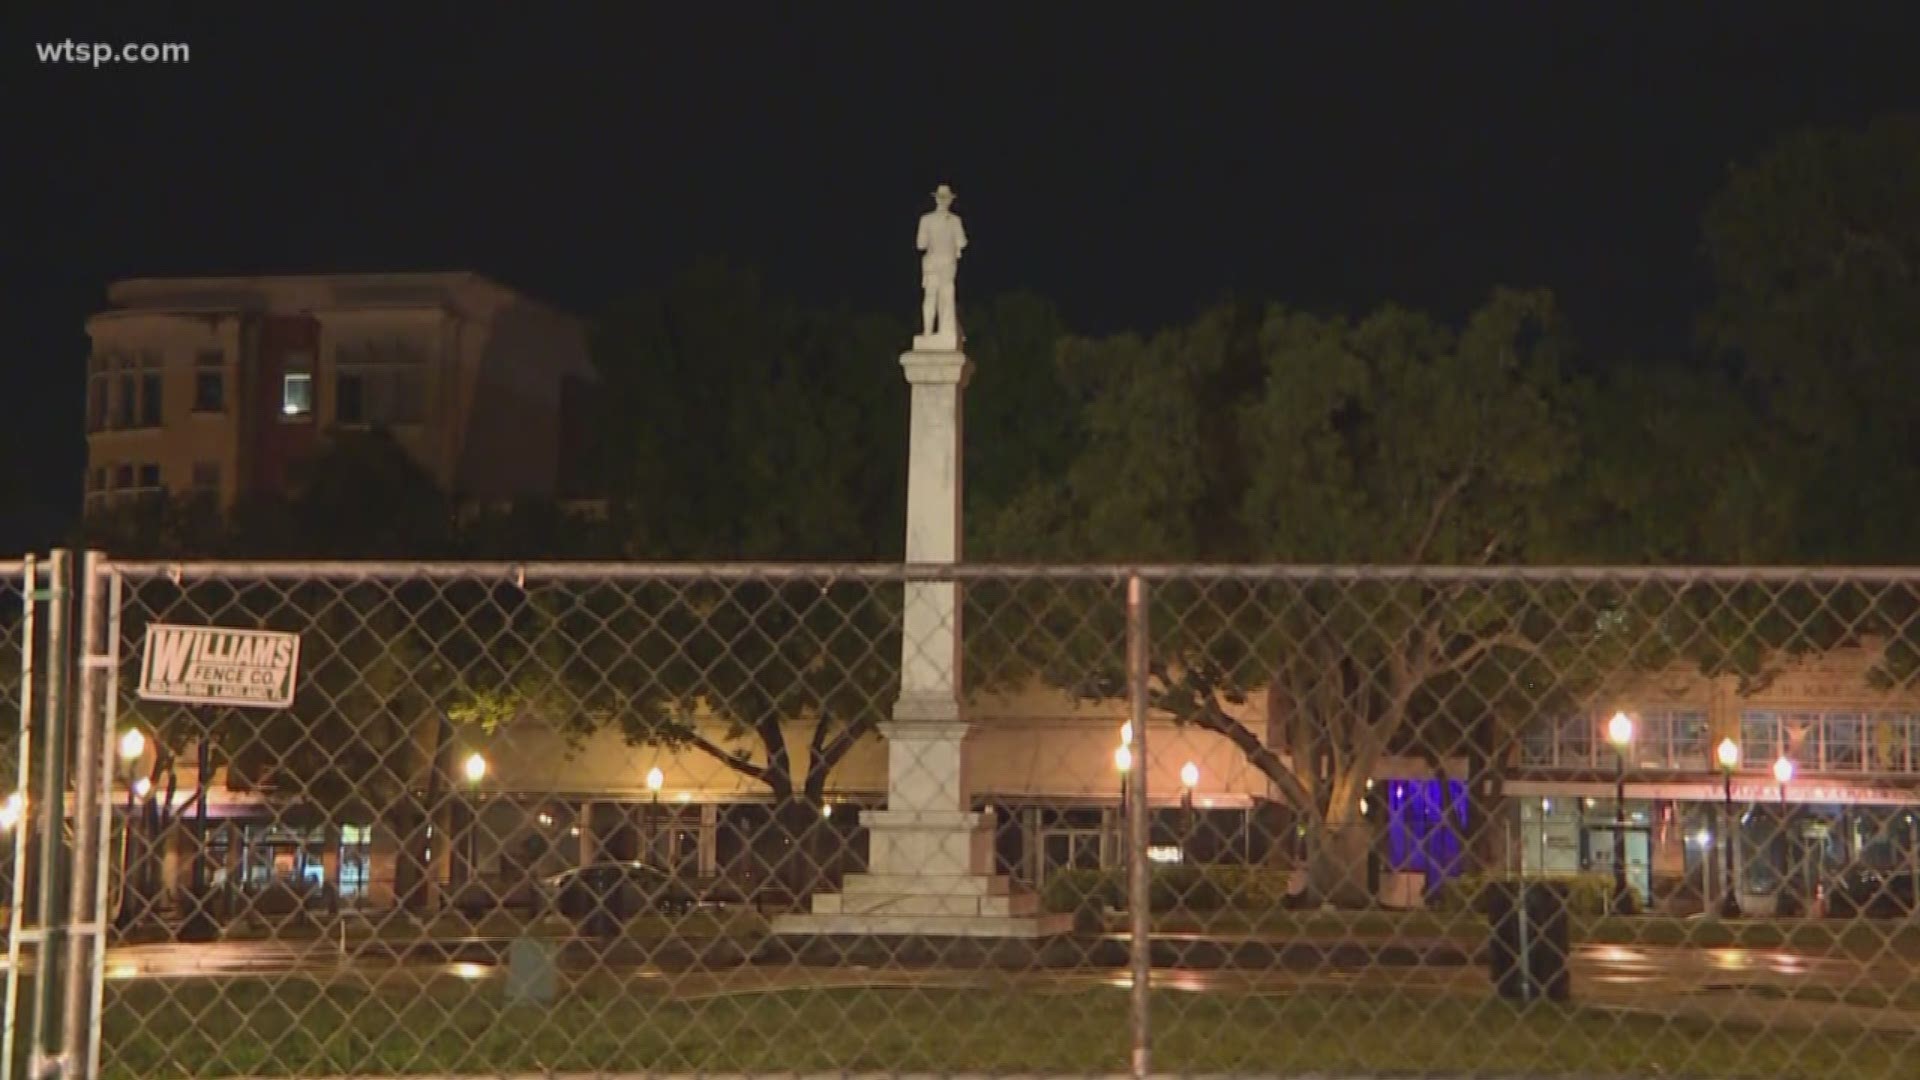 The process of moving a controversial Confederate monument at Munn Park in Lakeland is scheduled to begin Monday. https://on.wtsp.com/2Jx0qhA